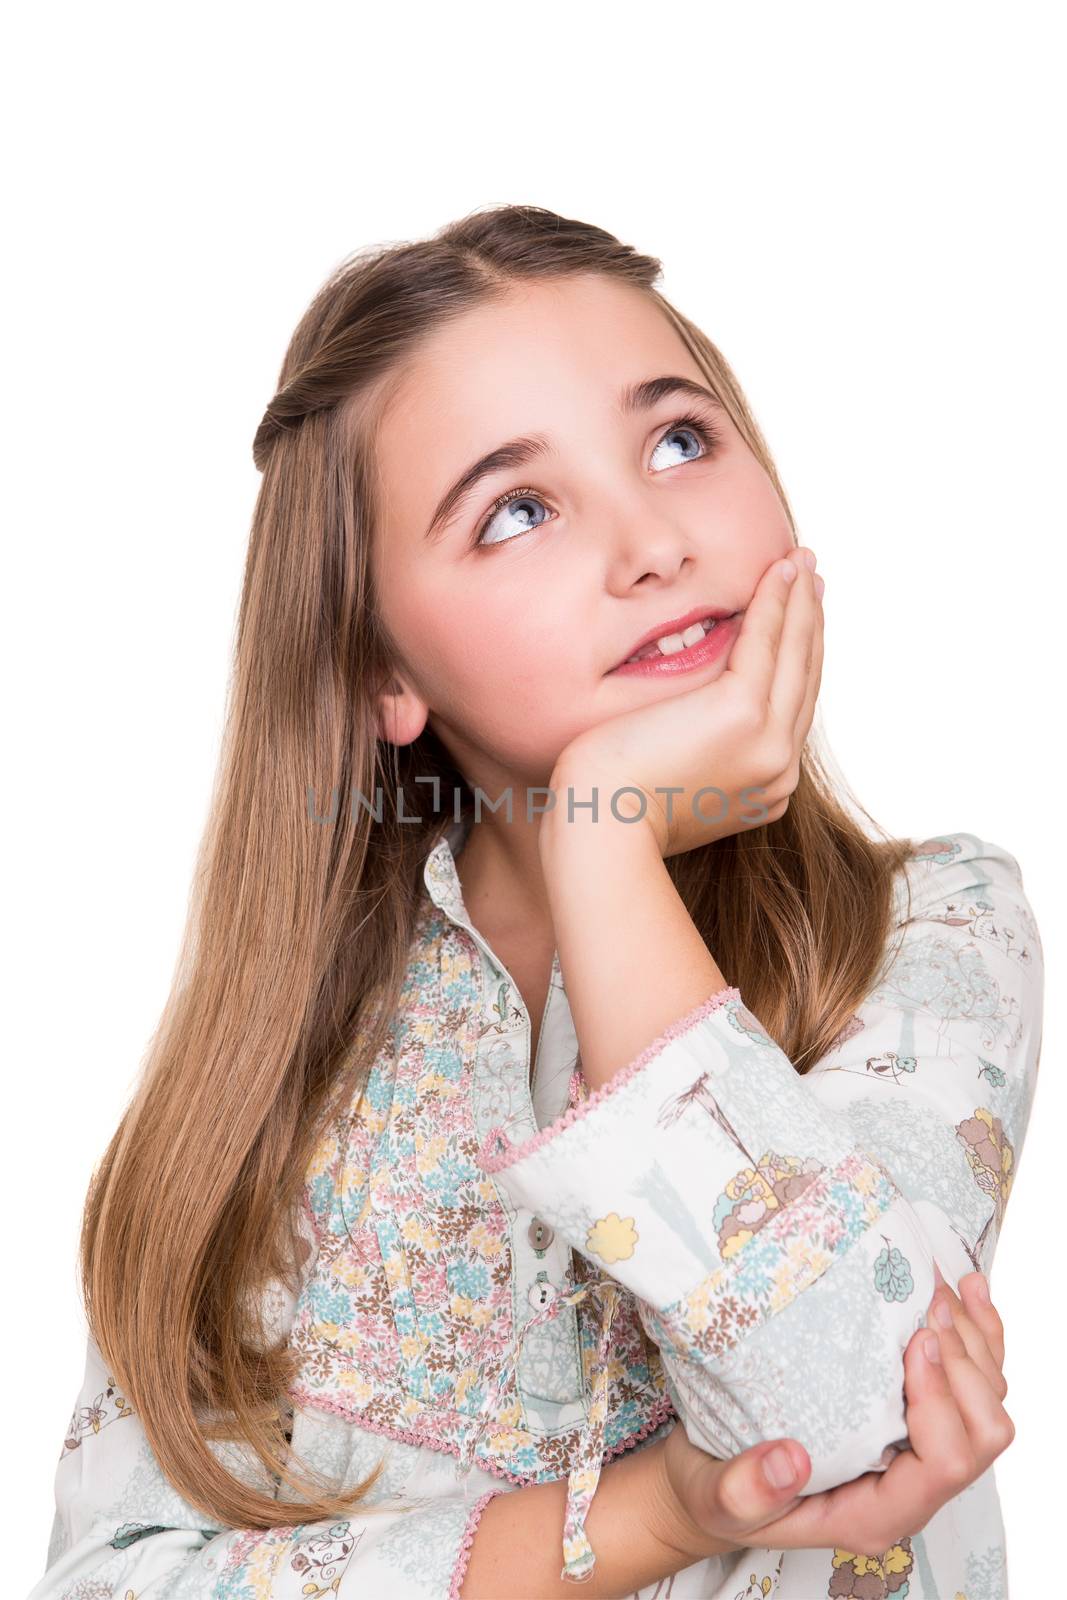 Portrait of a little girl over white background